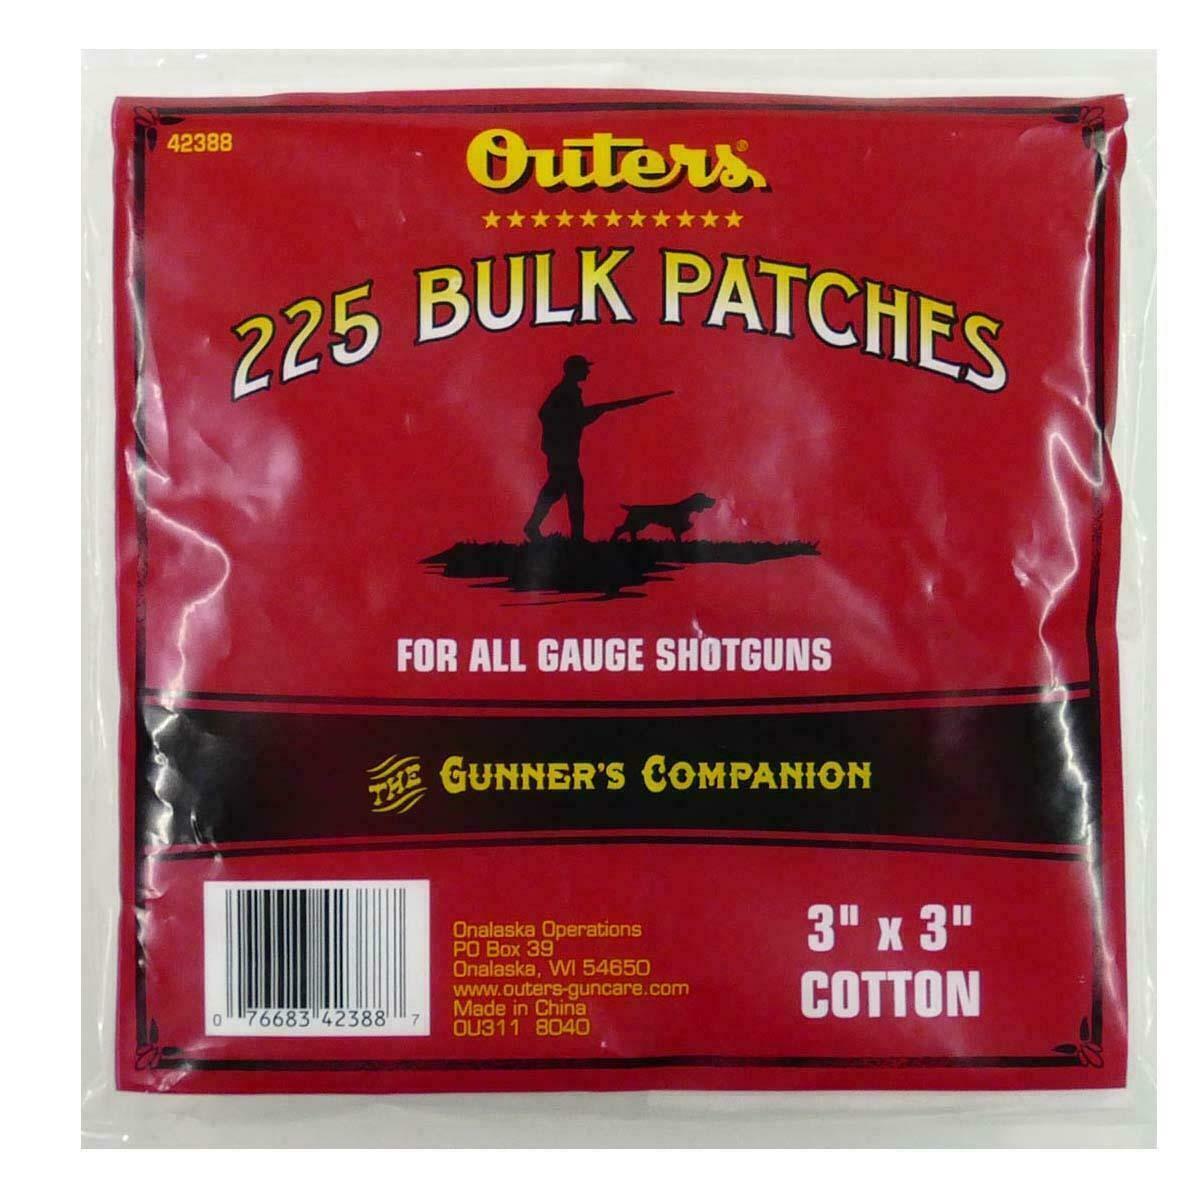 Outers Shotgun Bulk Cleaning Patches 225 Patches Decreasing Lubricating 42388 